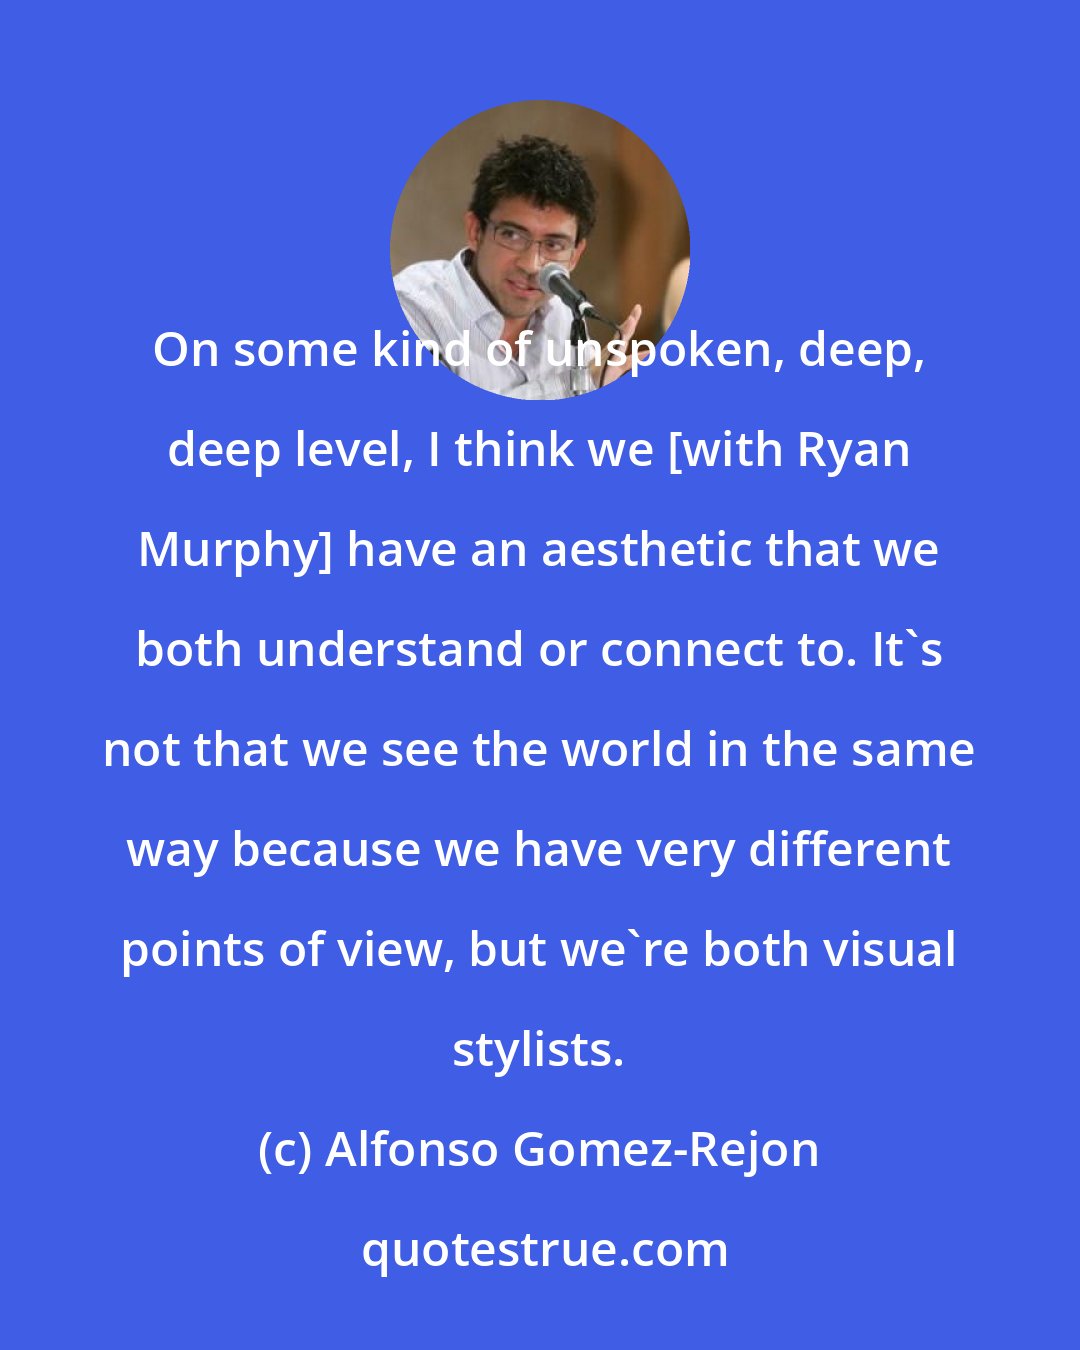 Alfonso Gomez-Rejon: On some kind of unspoken, deep, deep level, I think we [with Ryan Murphy] have an aesthetic that we both understand or connect to. It's not that we see the world in the same way because we have very different points of view, but we're both visual stylists.